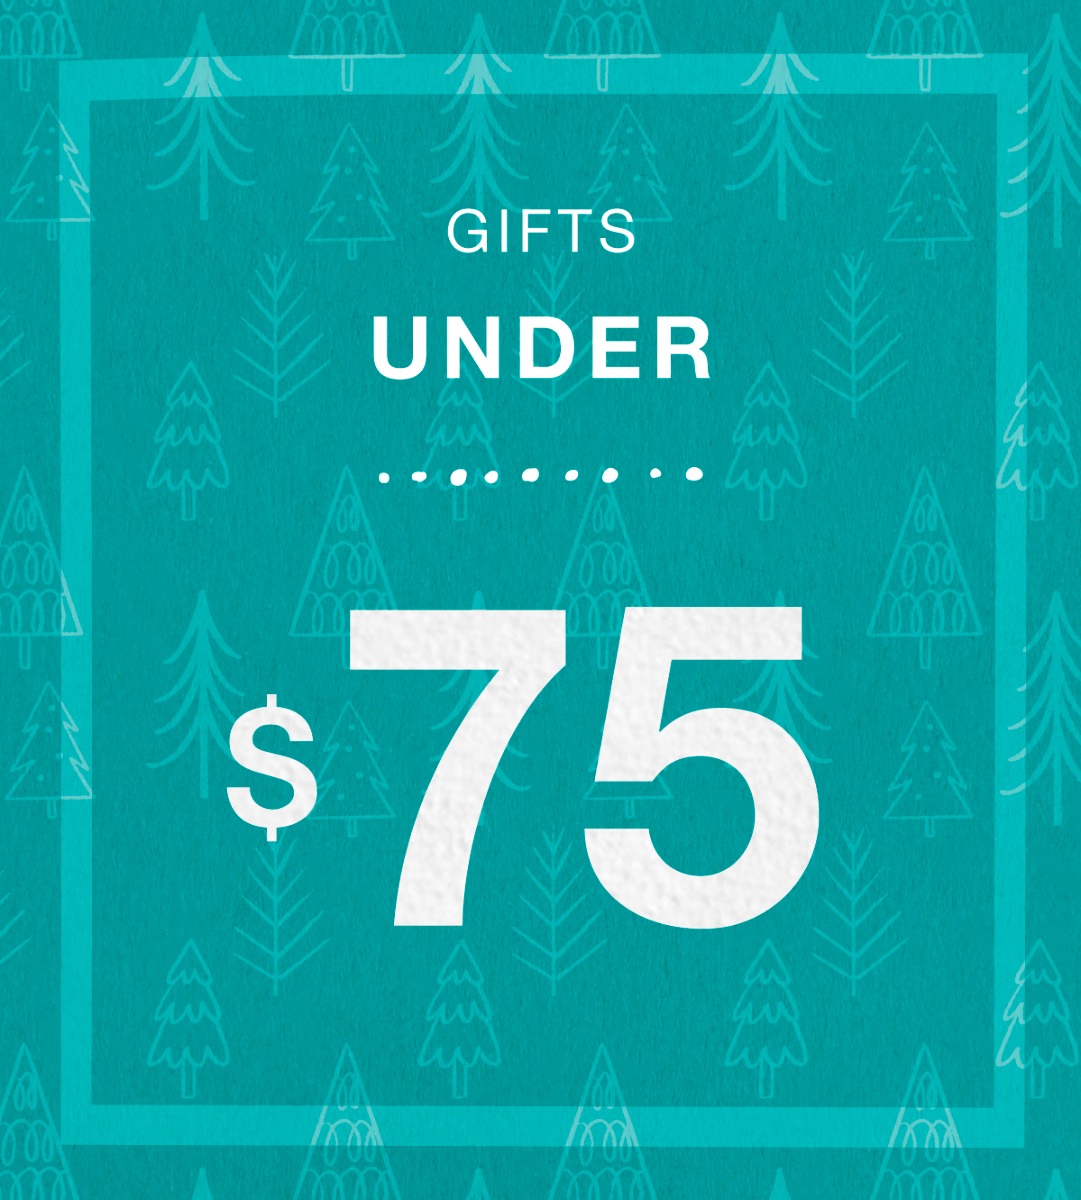 Gifts Under $75 dollars